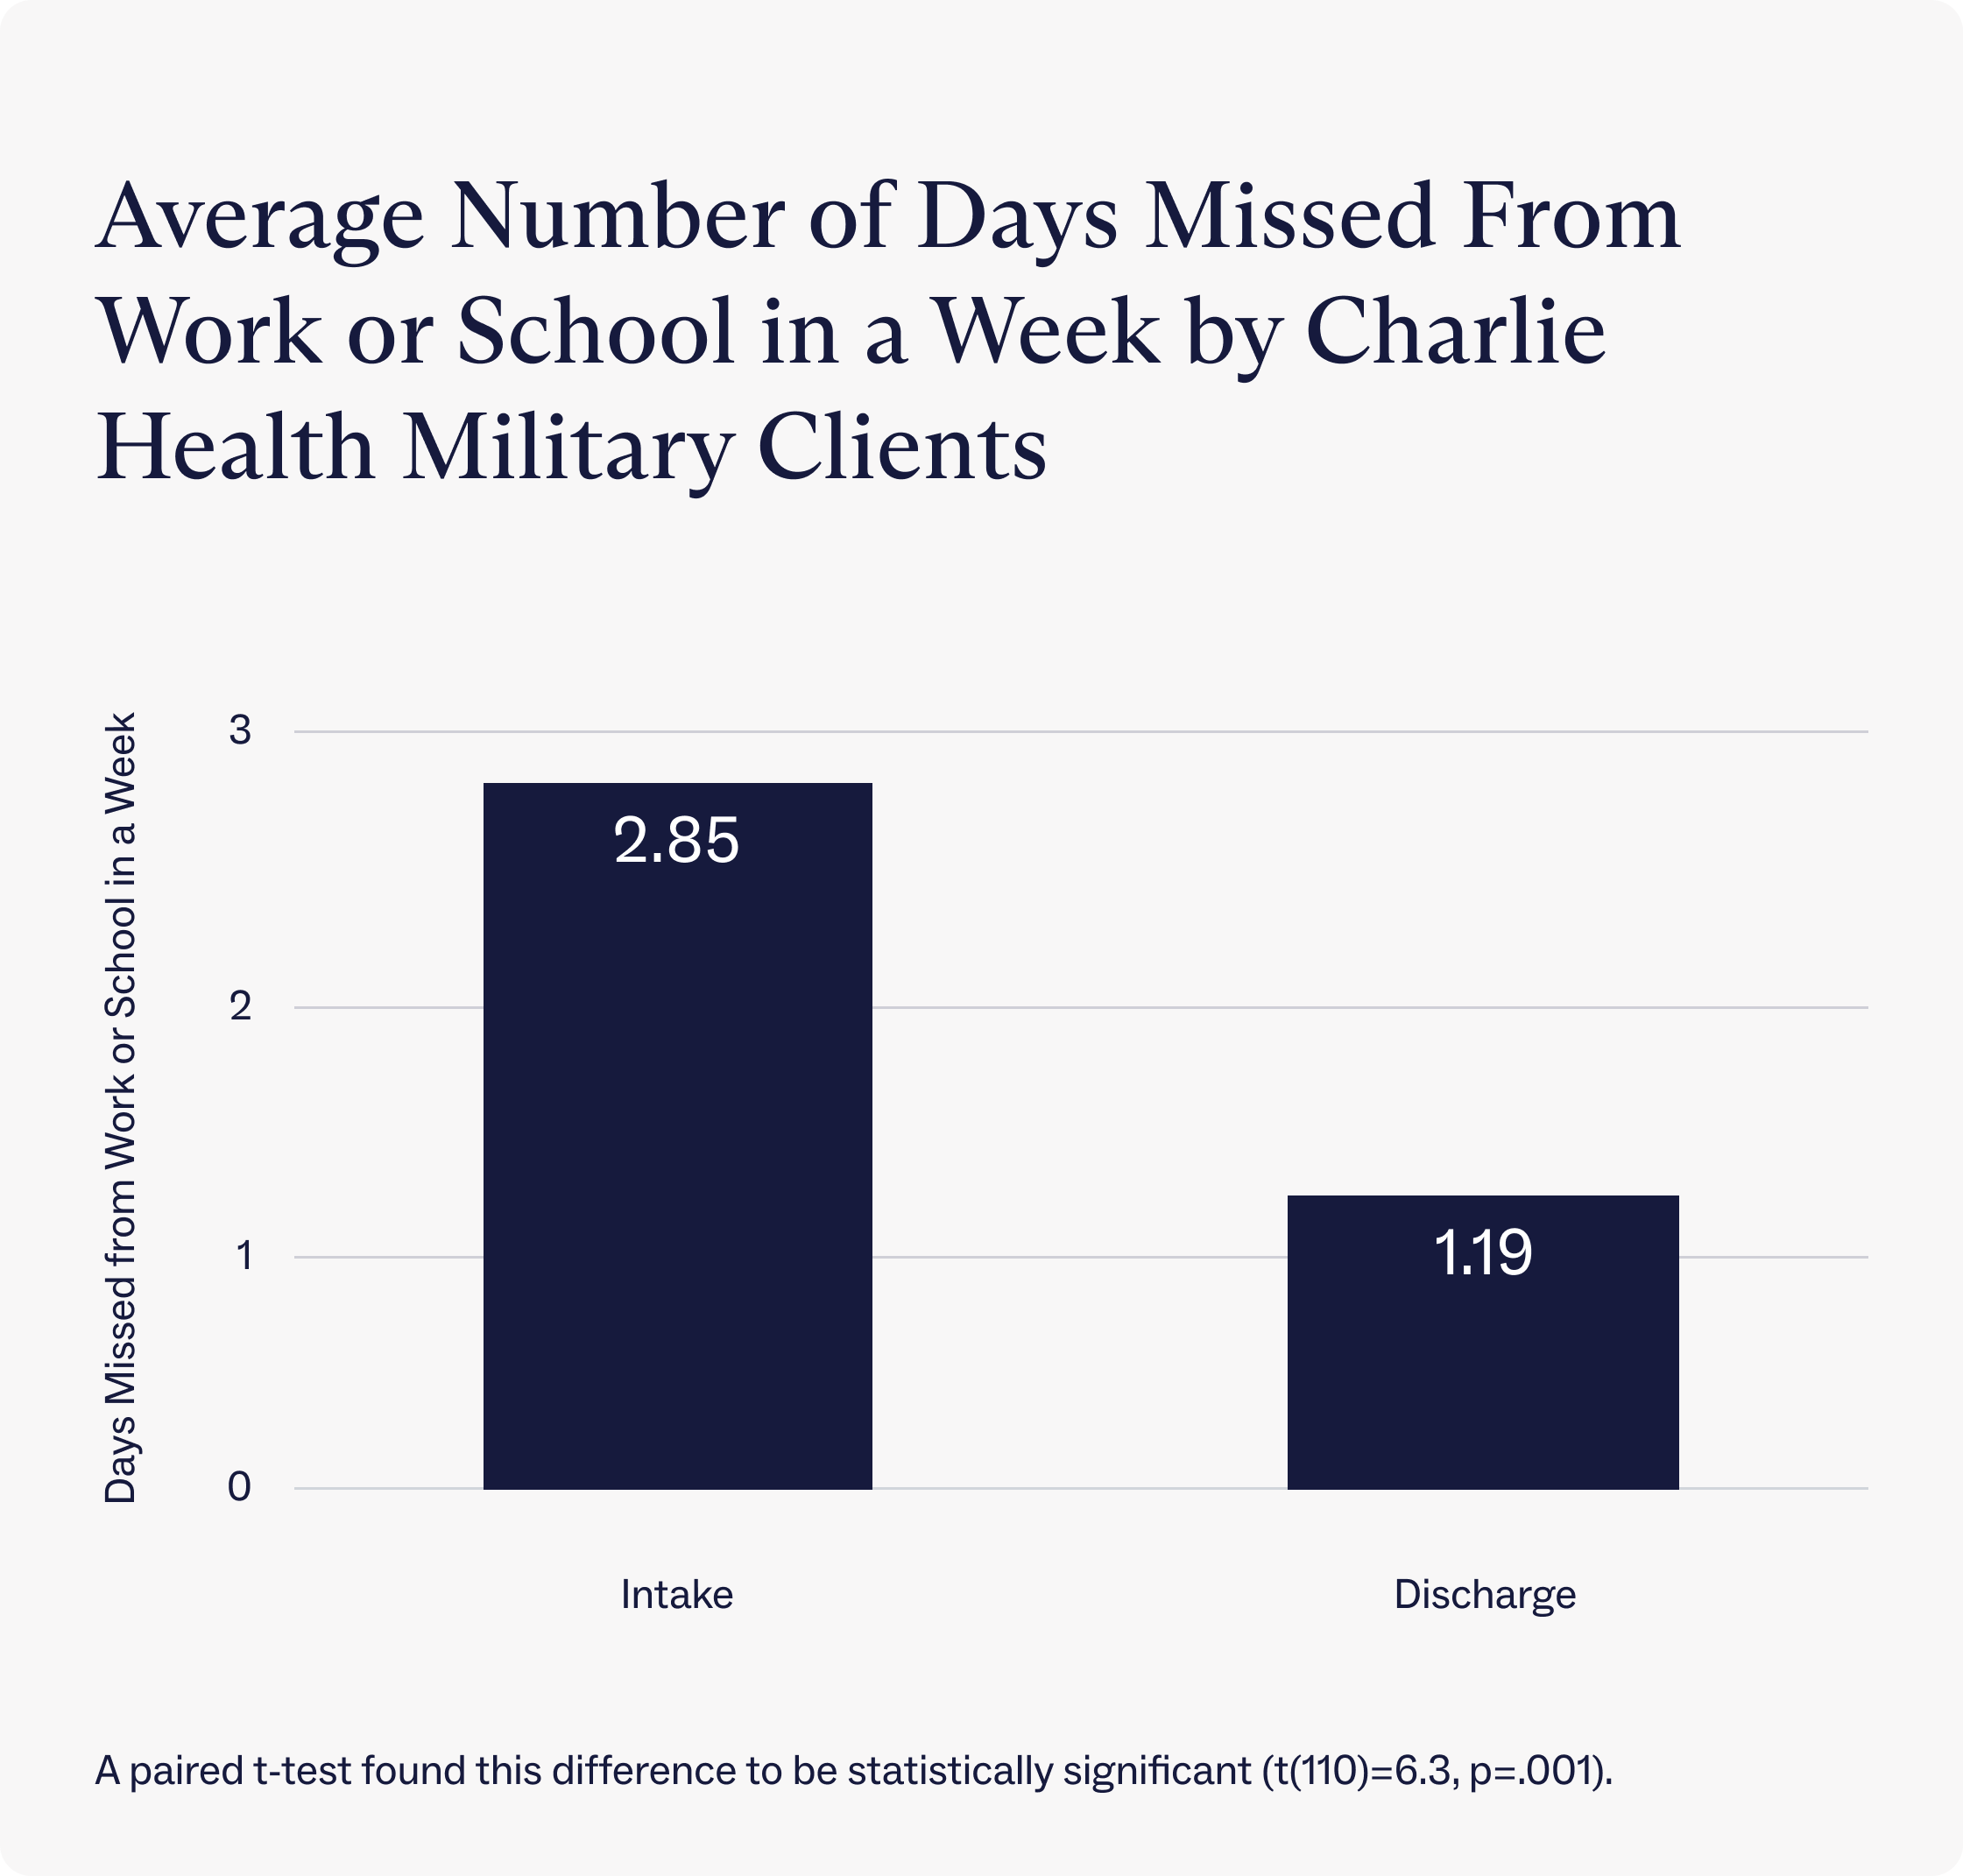 Average number of days missed from work or school in a week by Charlie Health military clients at intake and discharge